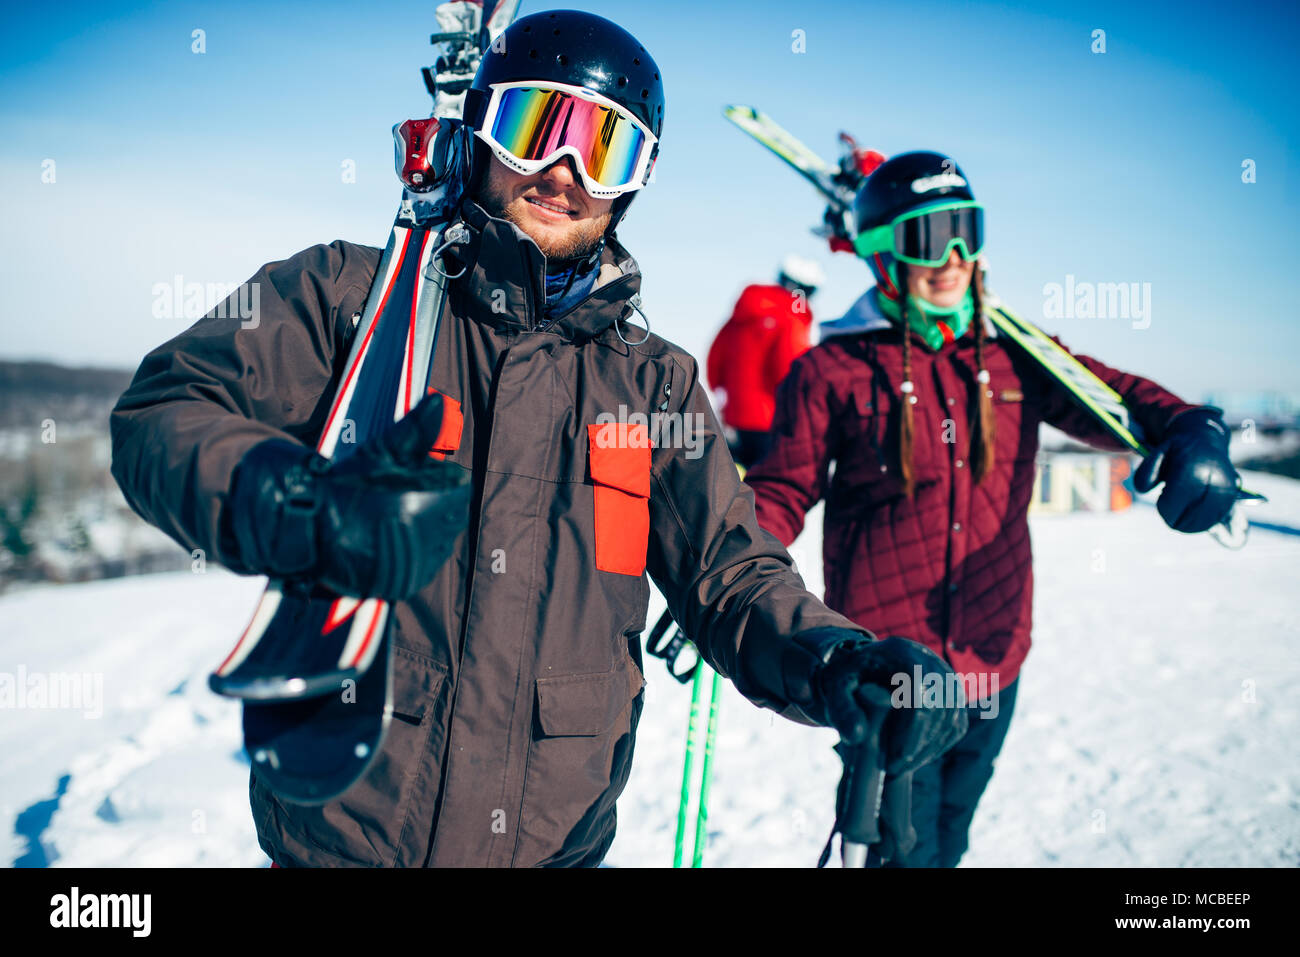 Male and female skiers poses with skis and poles Stock Photo